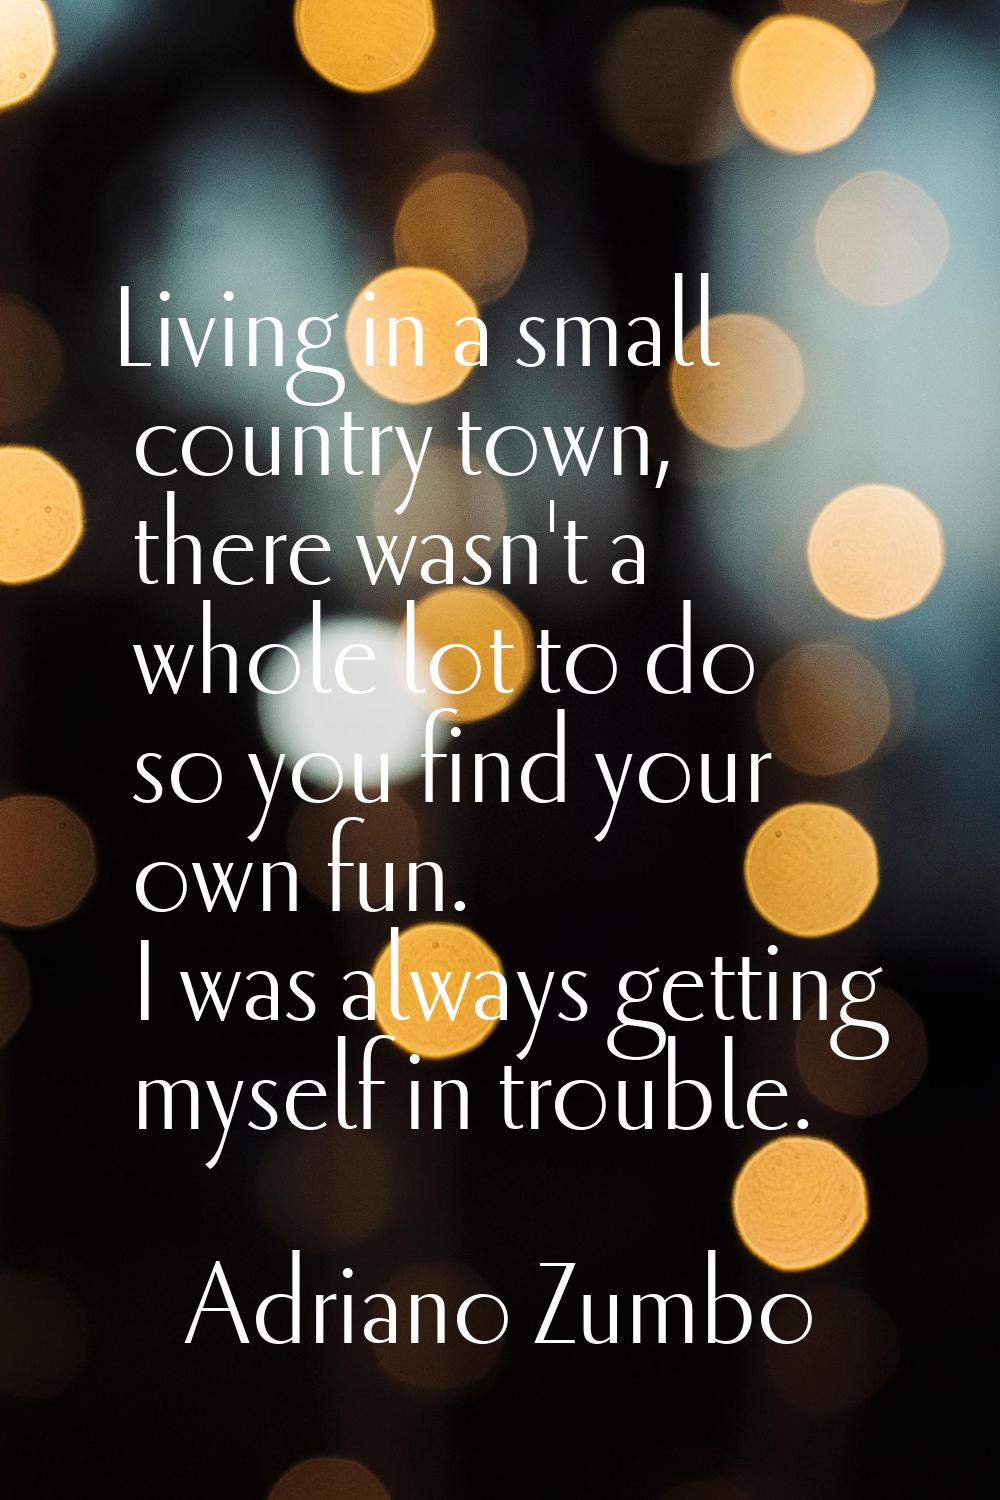 Living in a small country town, there wasn't a whole lot to do so you find your own fun. I was alwa